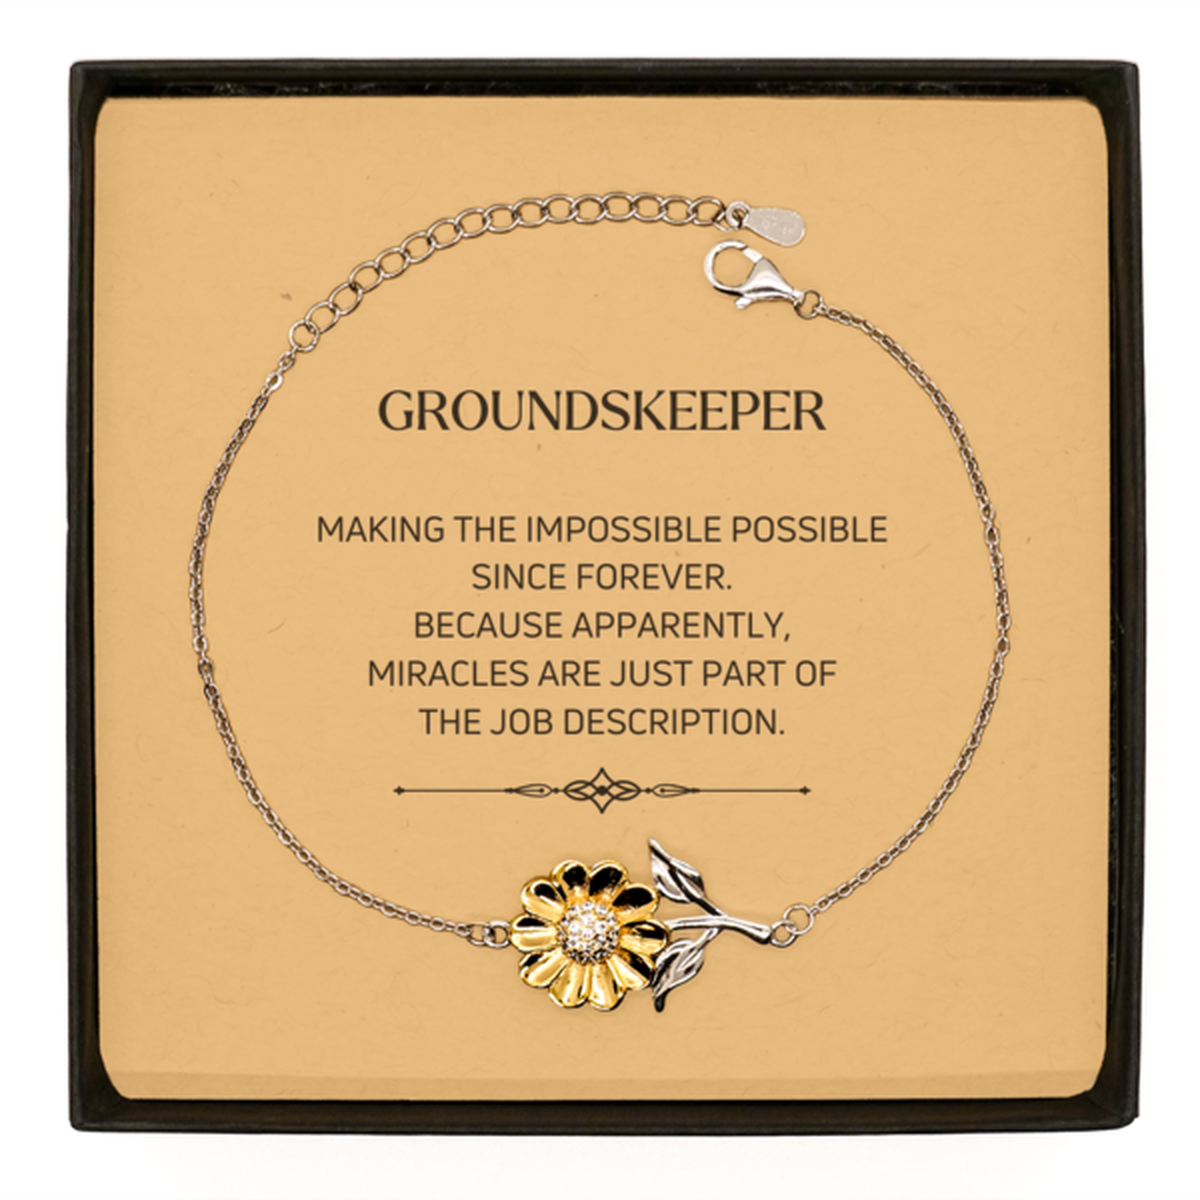 Funny Groundskeeper Gifts, Miracles are just part of the job description, Inspirational Birthday Sunflower Bracelet For Groundskeeper, Men, Women, Coworkers, Friends, Boss